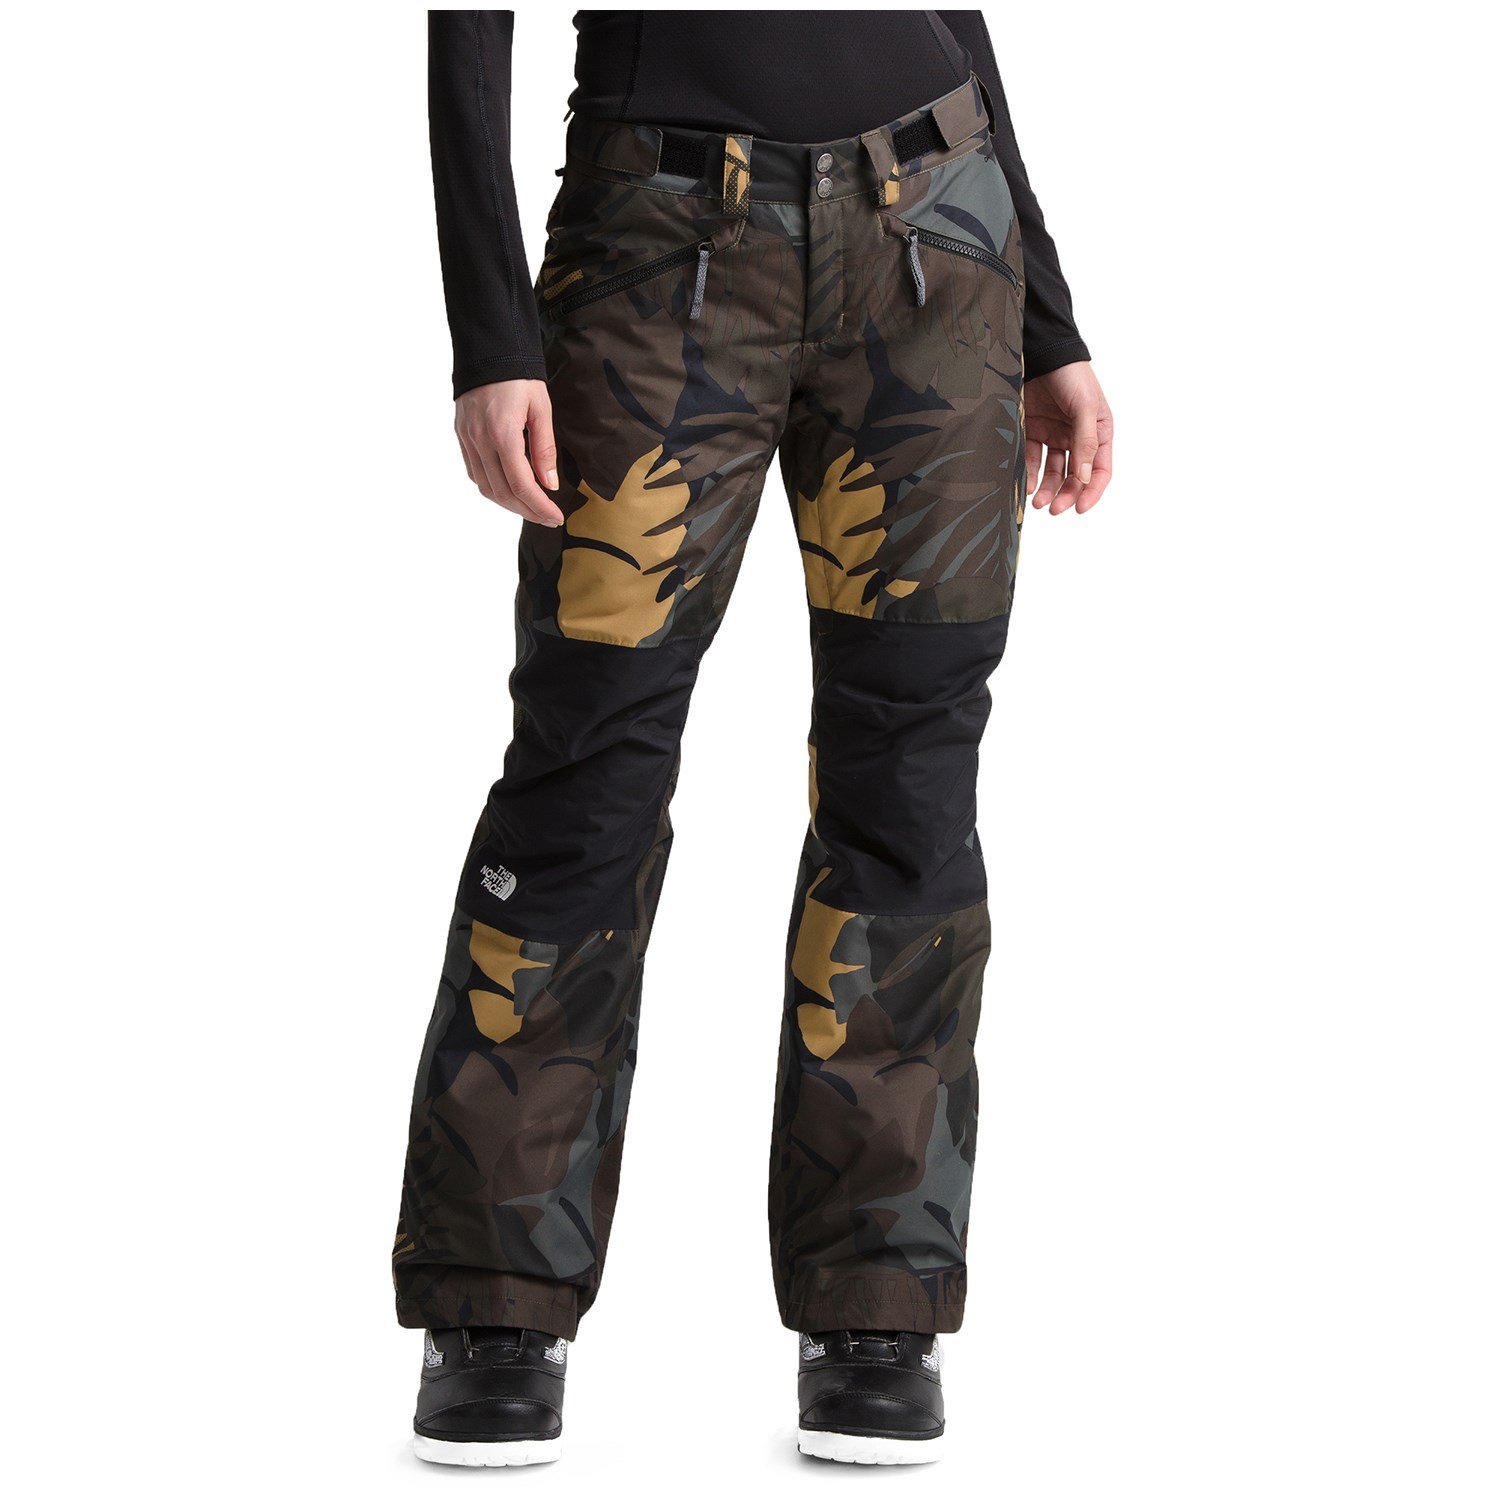 women's the north face pants